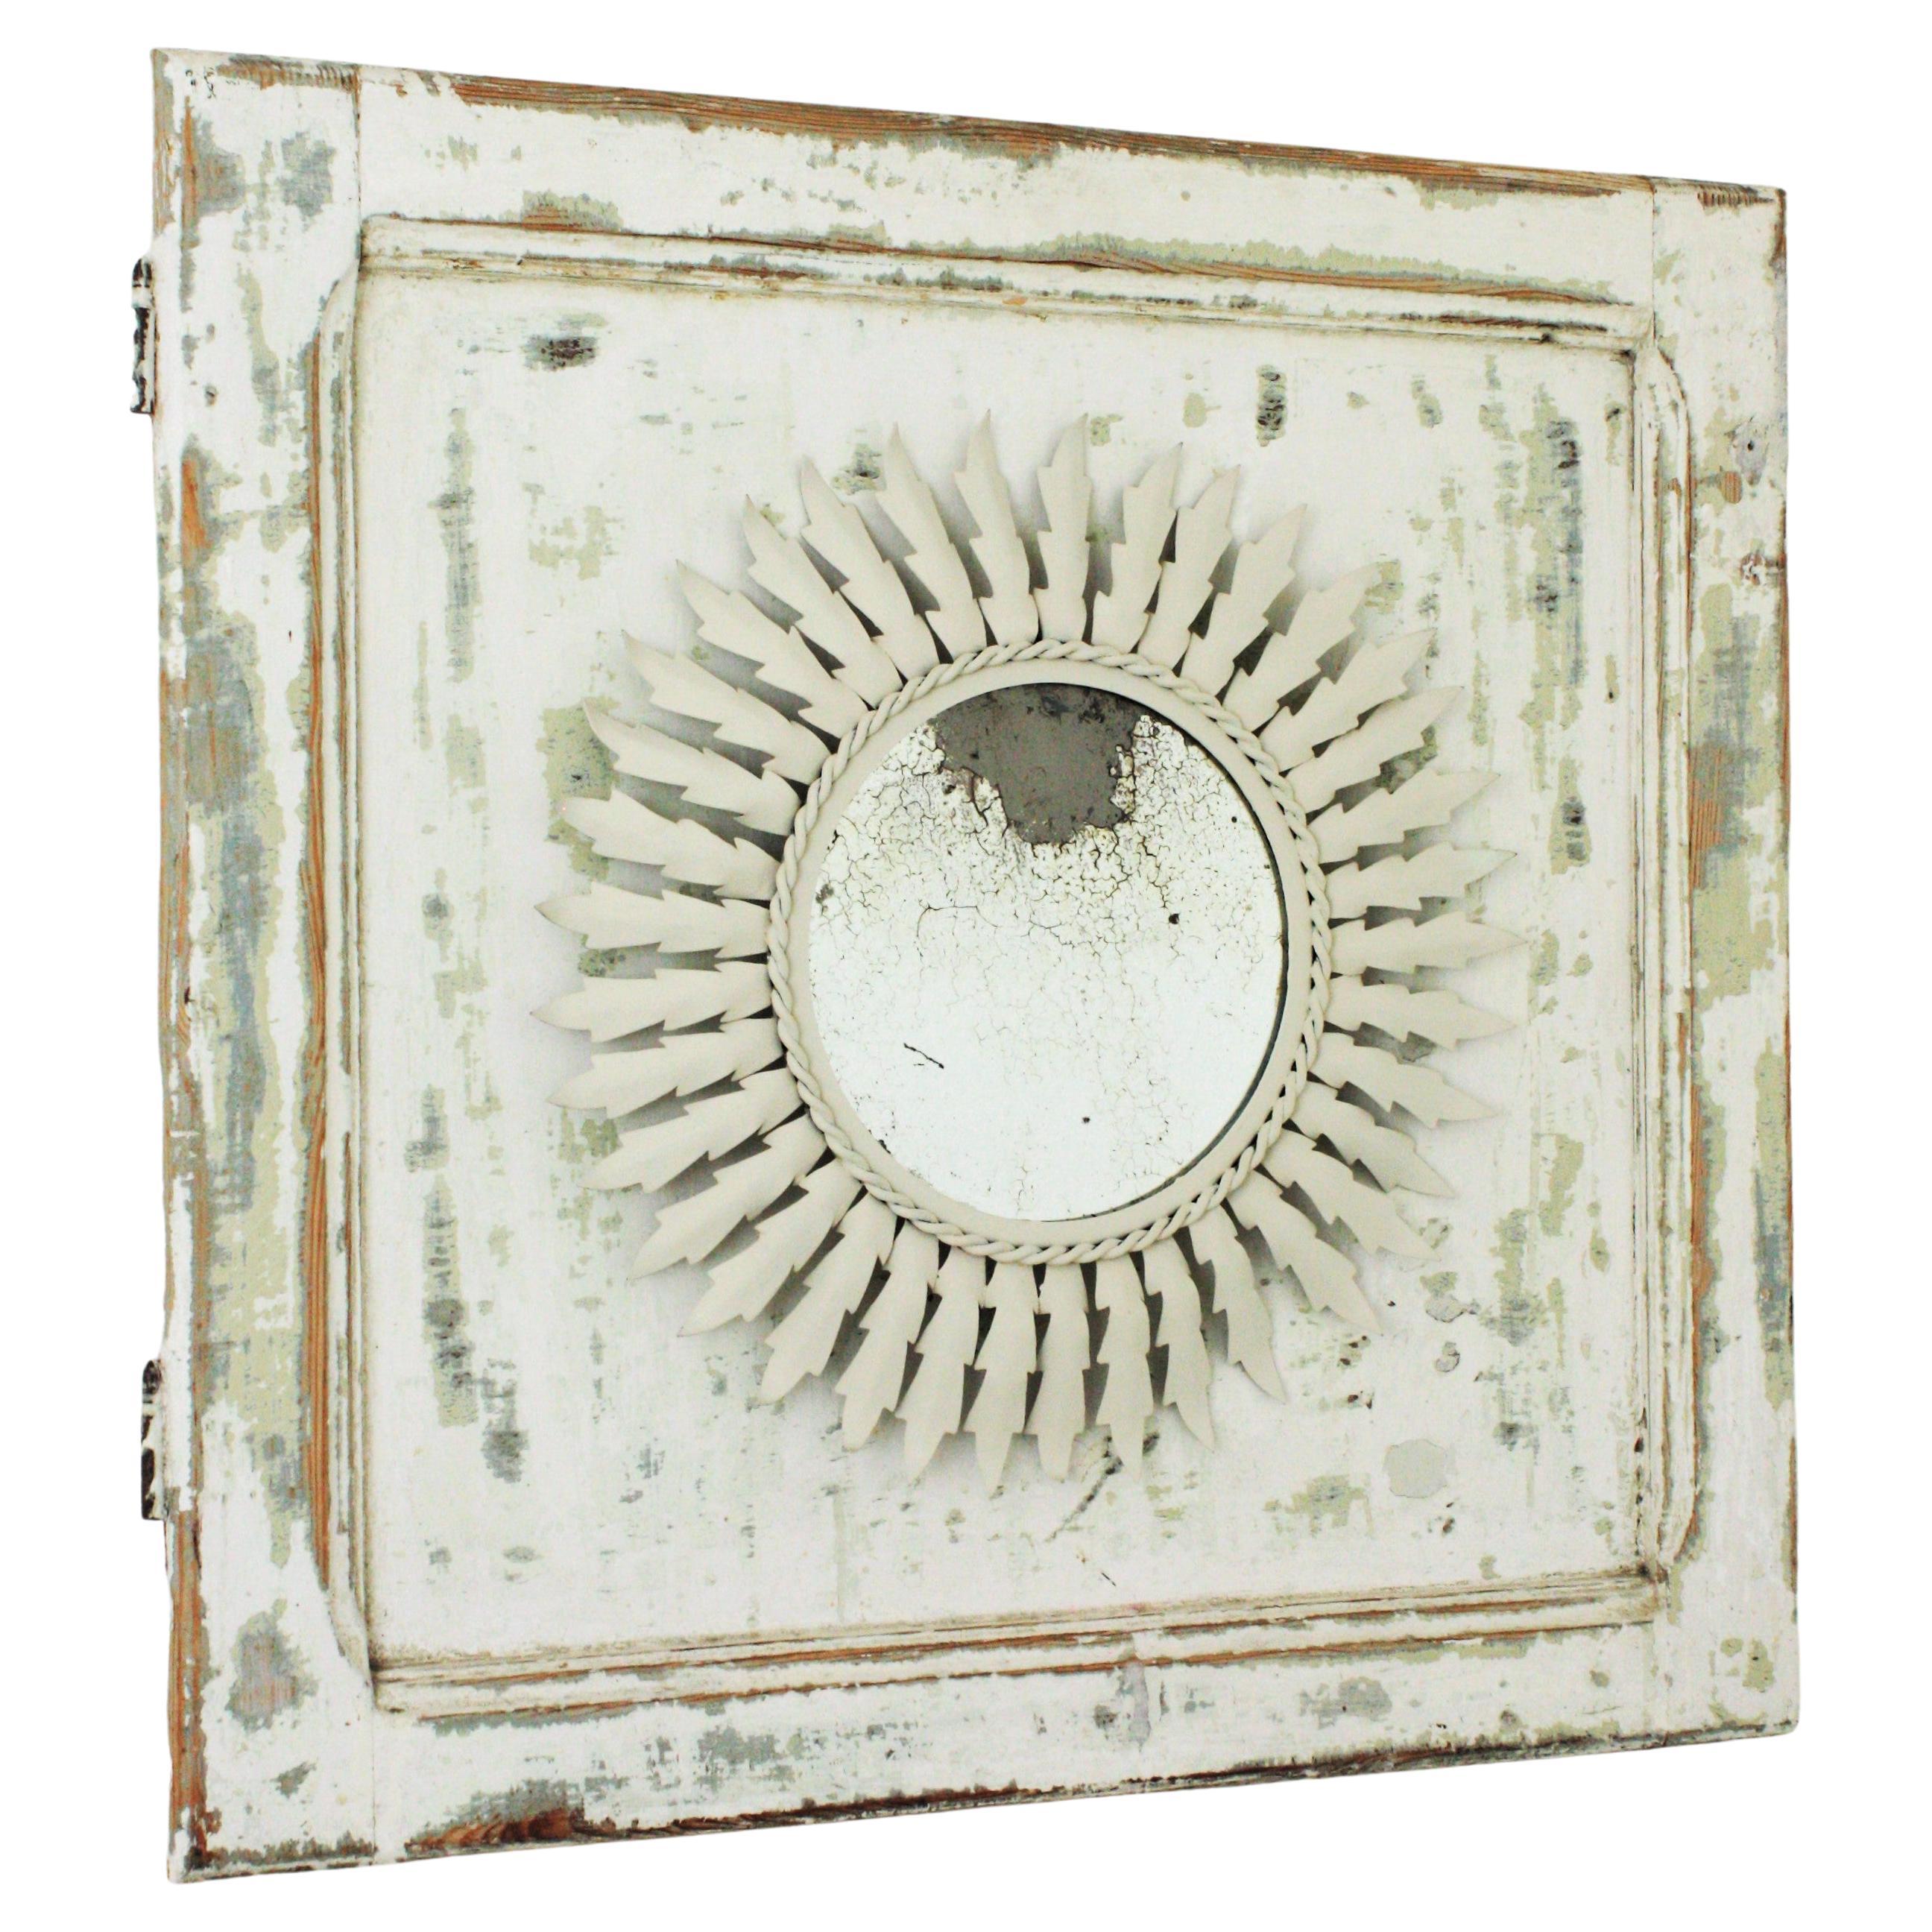 Sunburst Mirror in White Metal Framed by a Wood Patinated Door